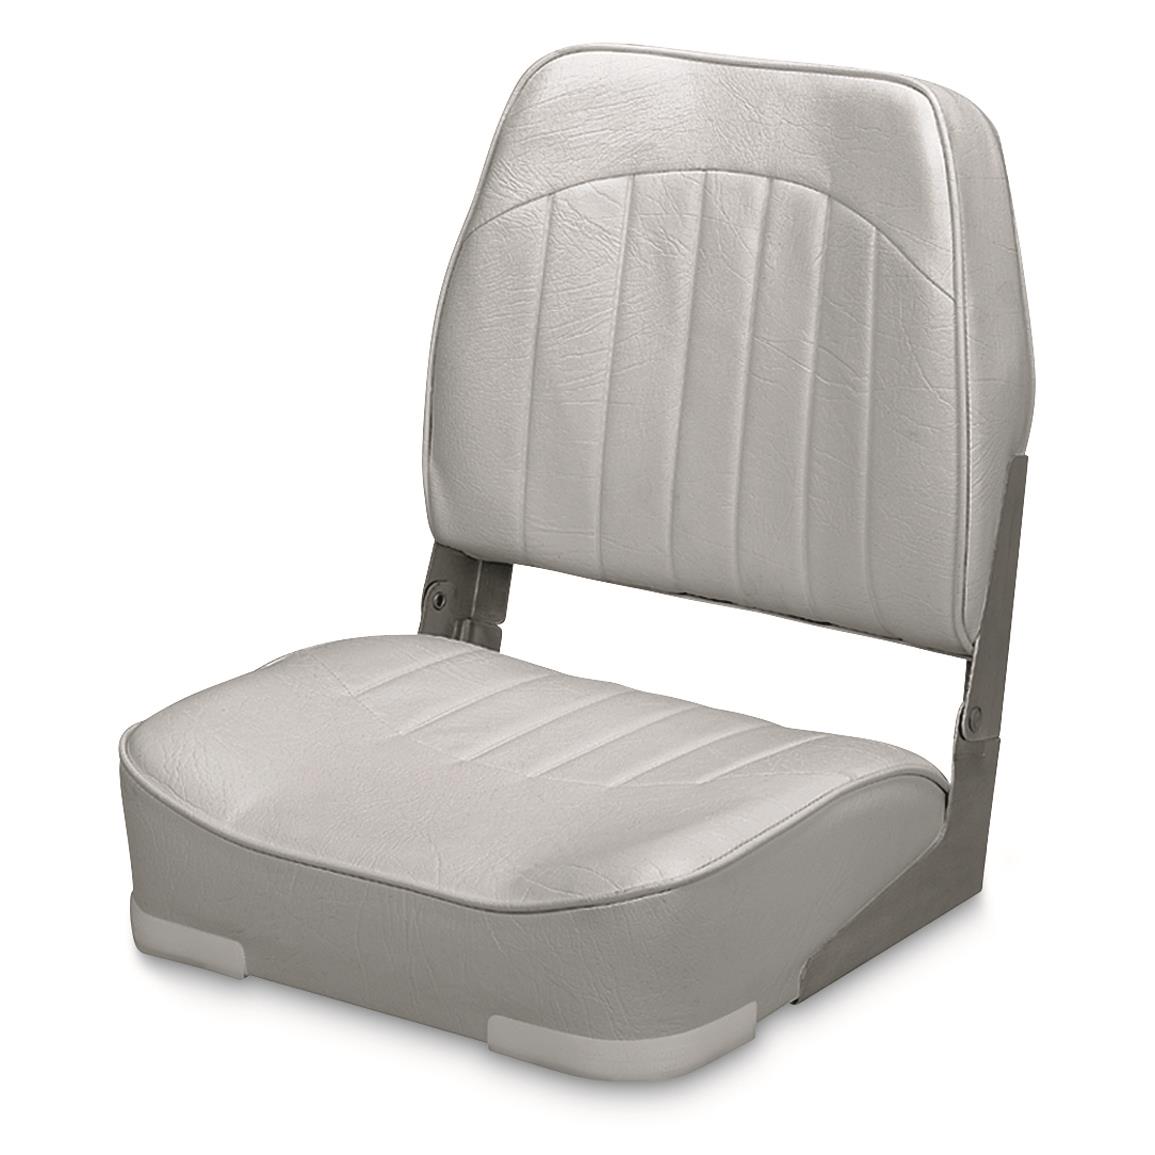 Wise Low - back Economy Fishing Boat Seat, Gray